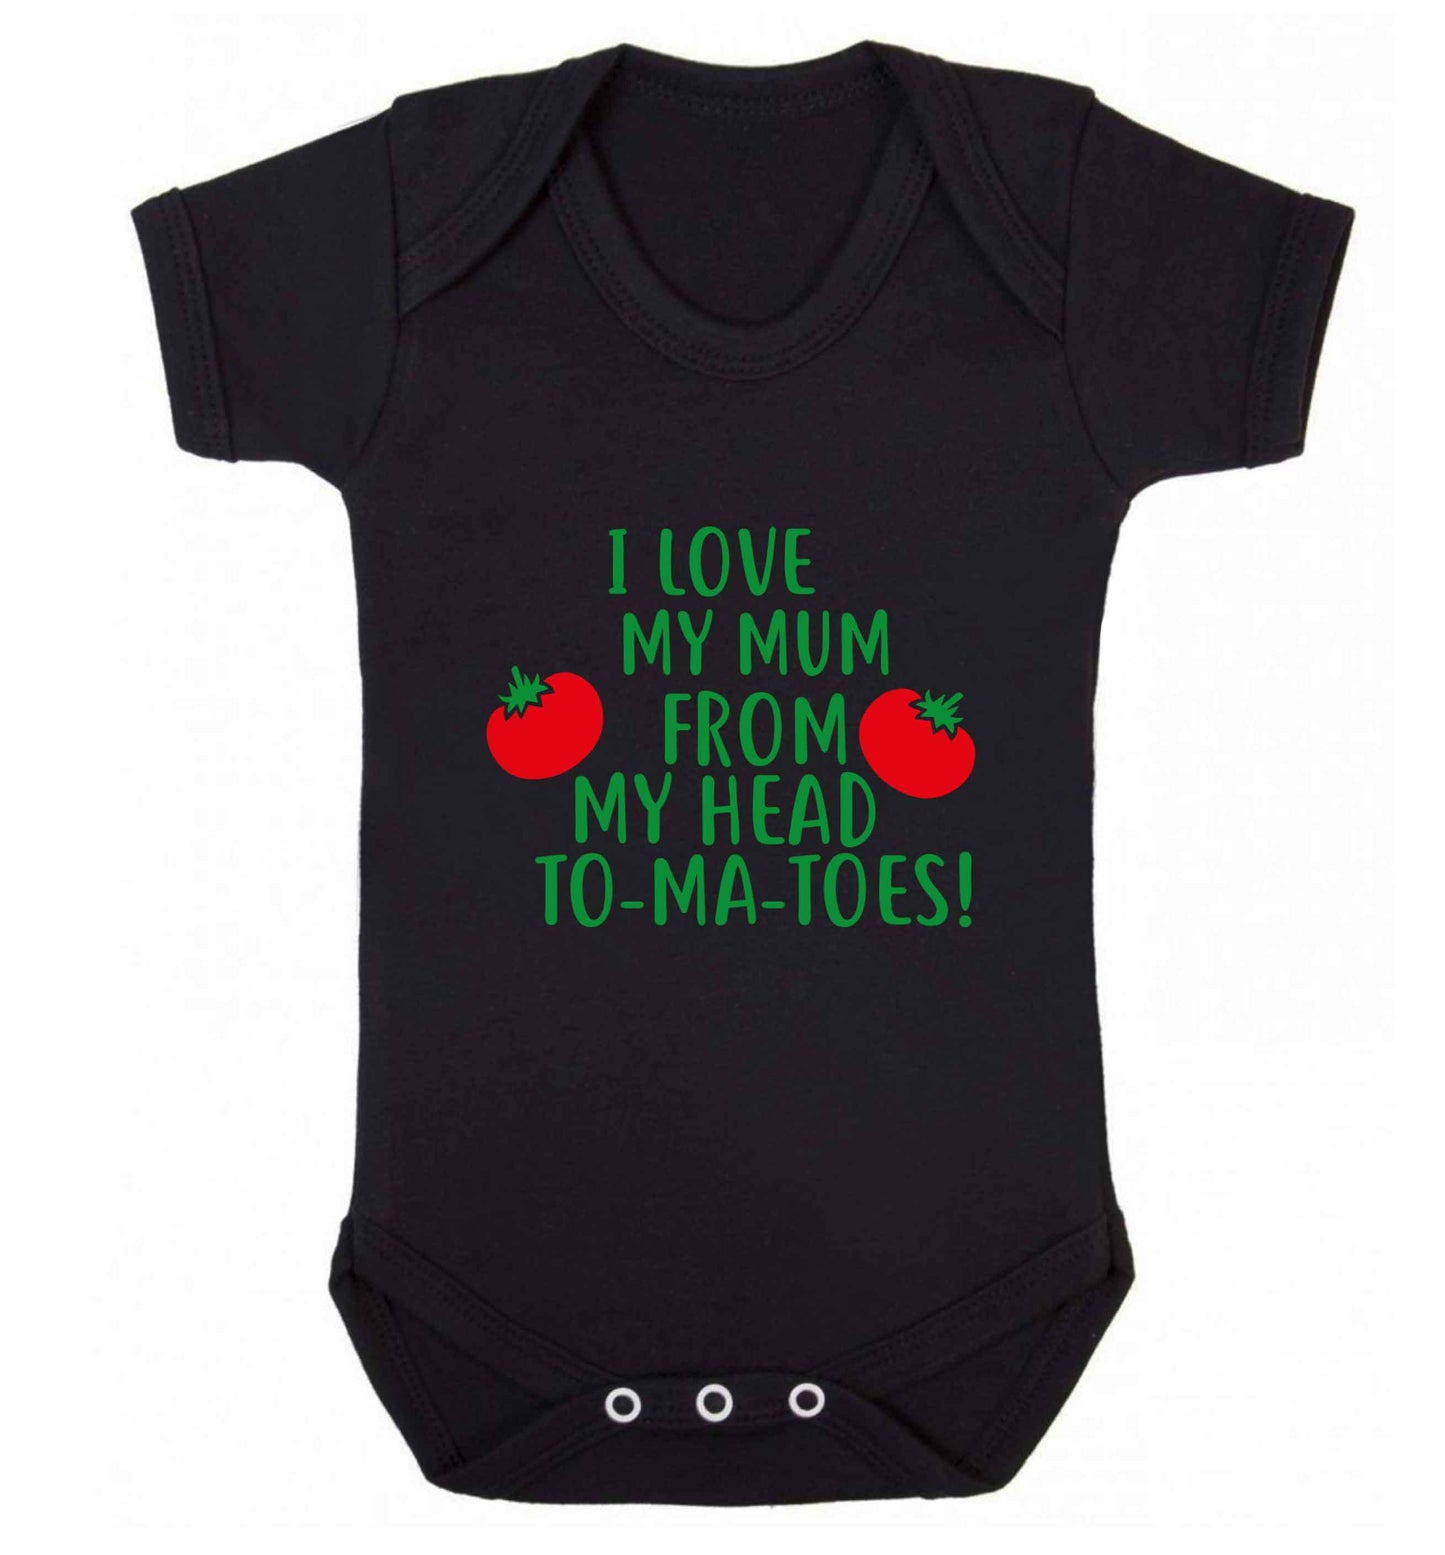 I love my mum from my head to-my-toes! baby vest black 18-24 months